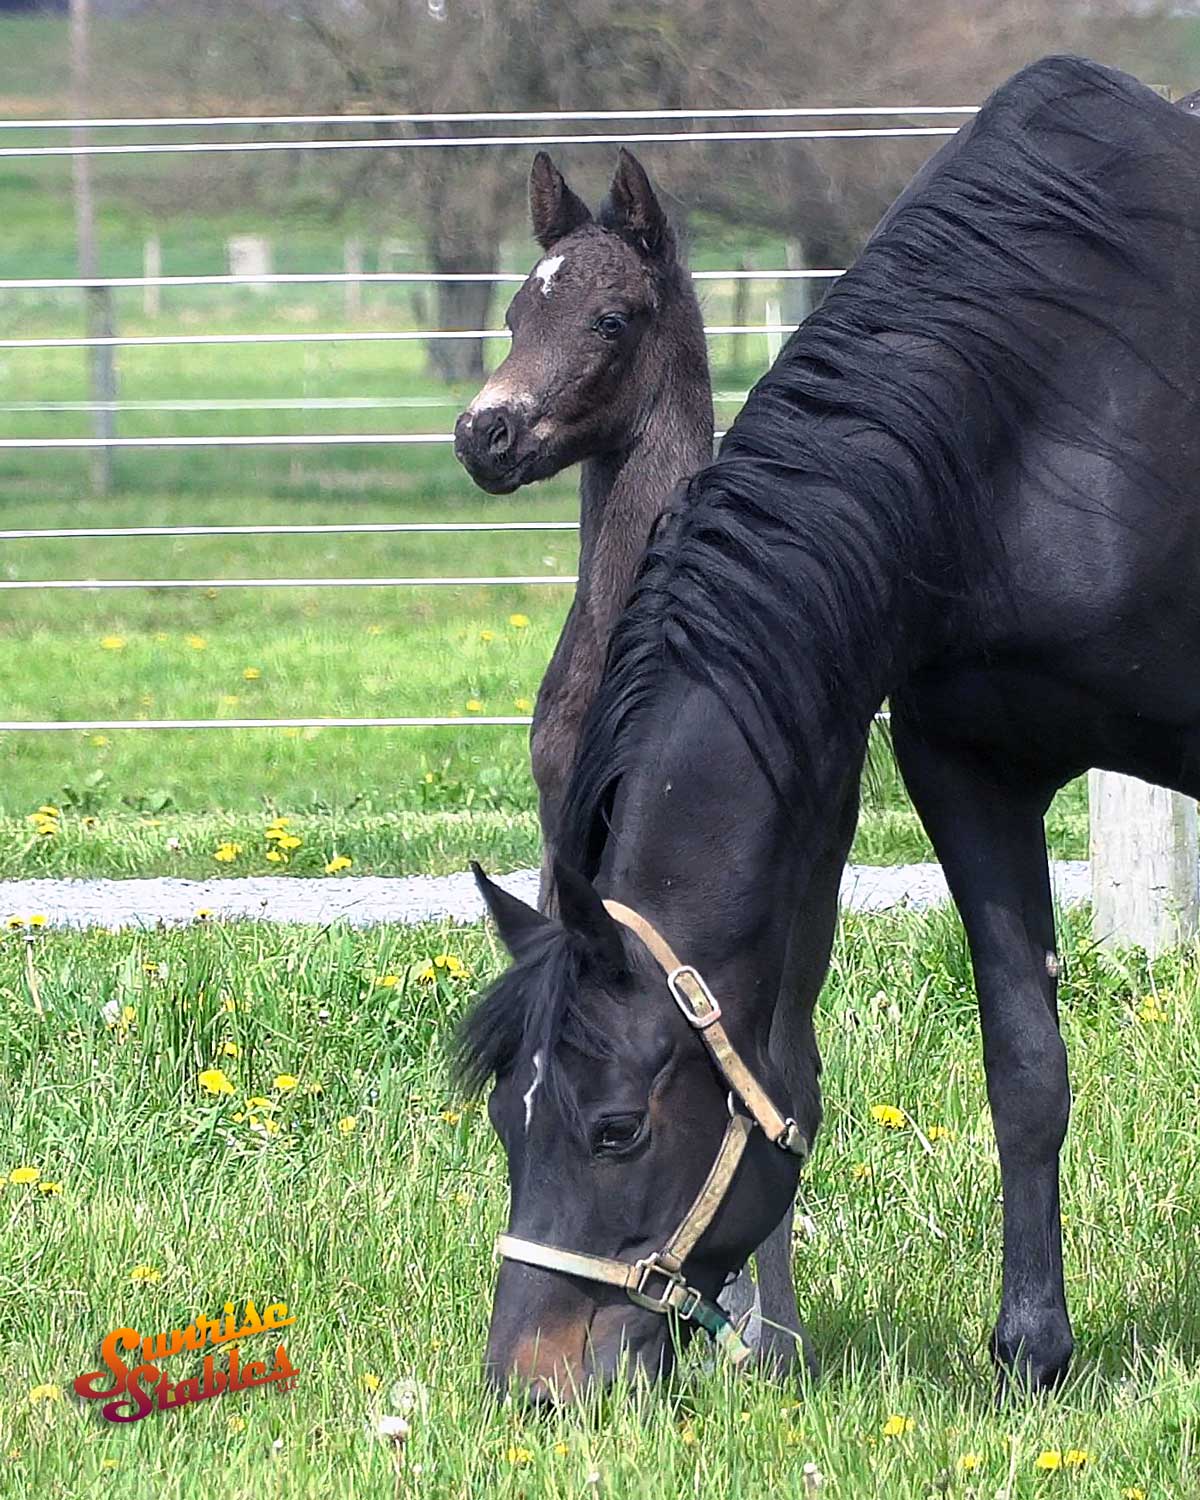 The 2020 Otto B foals are here!